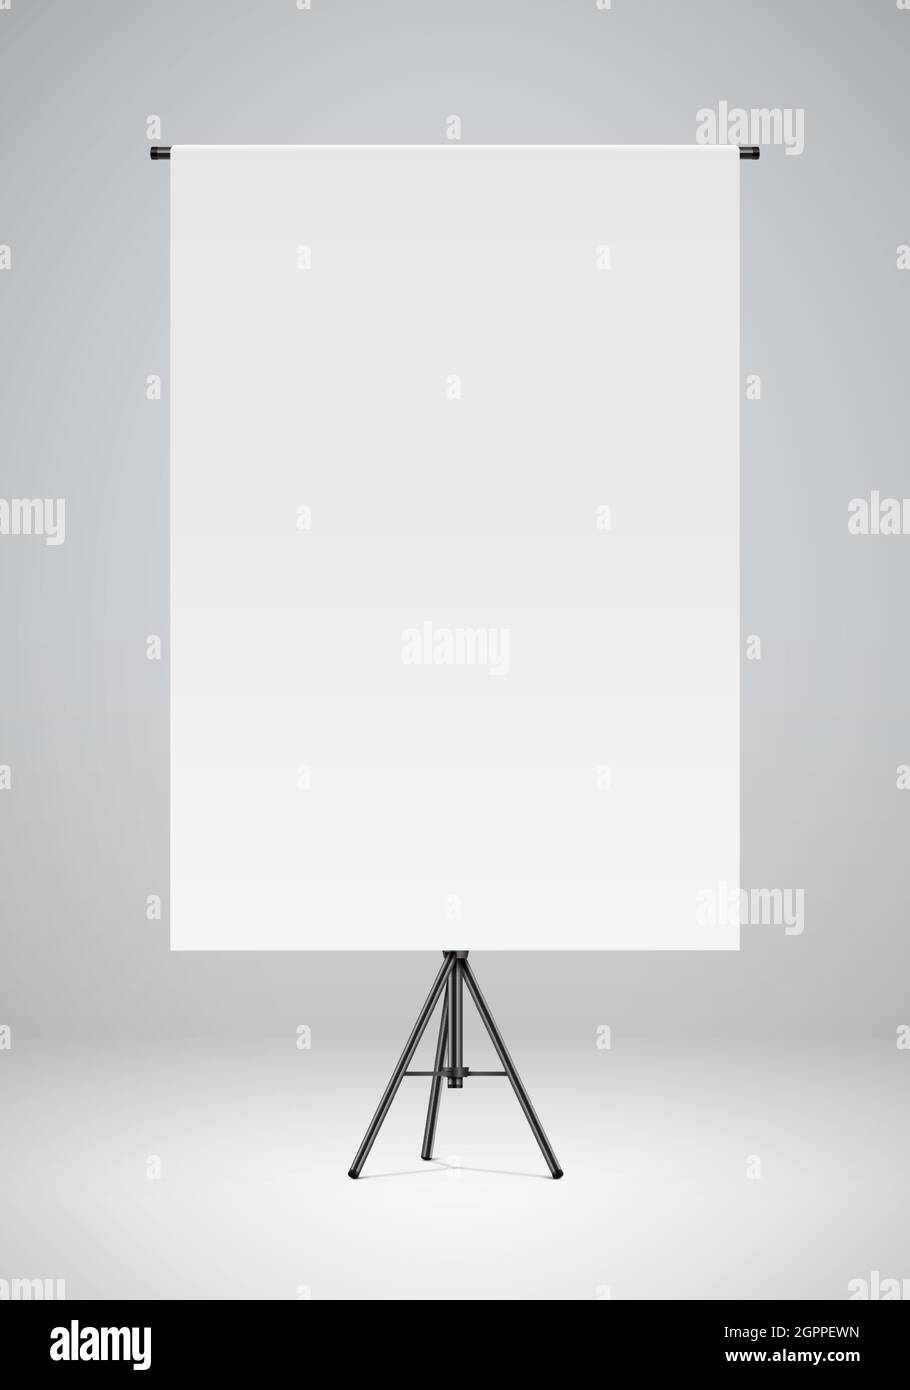 Blank white paper hanging on a black stand. Photo studio backdrop, realistic vector illustration. Flip chart paper mockup background. Stock Vector